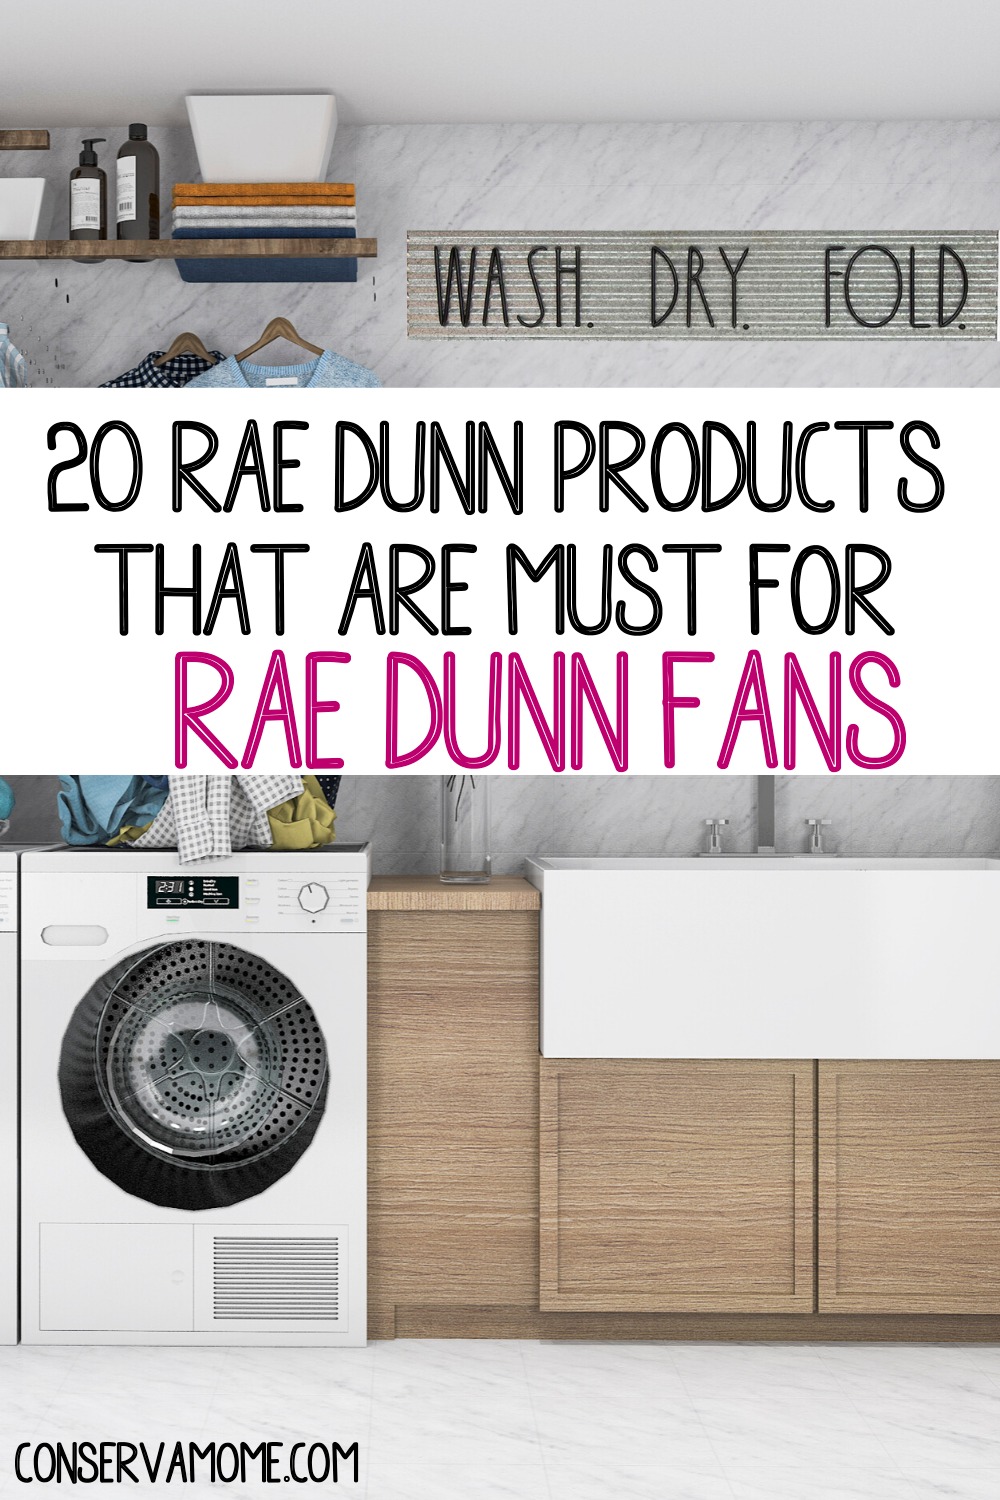 Why is Rae Dunn So Popular & Which Items Are Worth More? – a coastal cottage